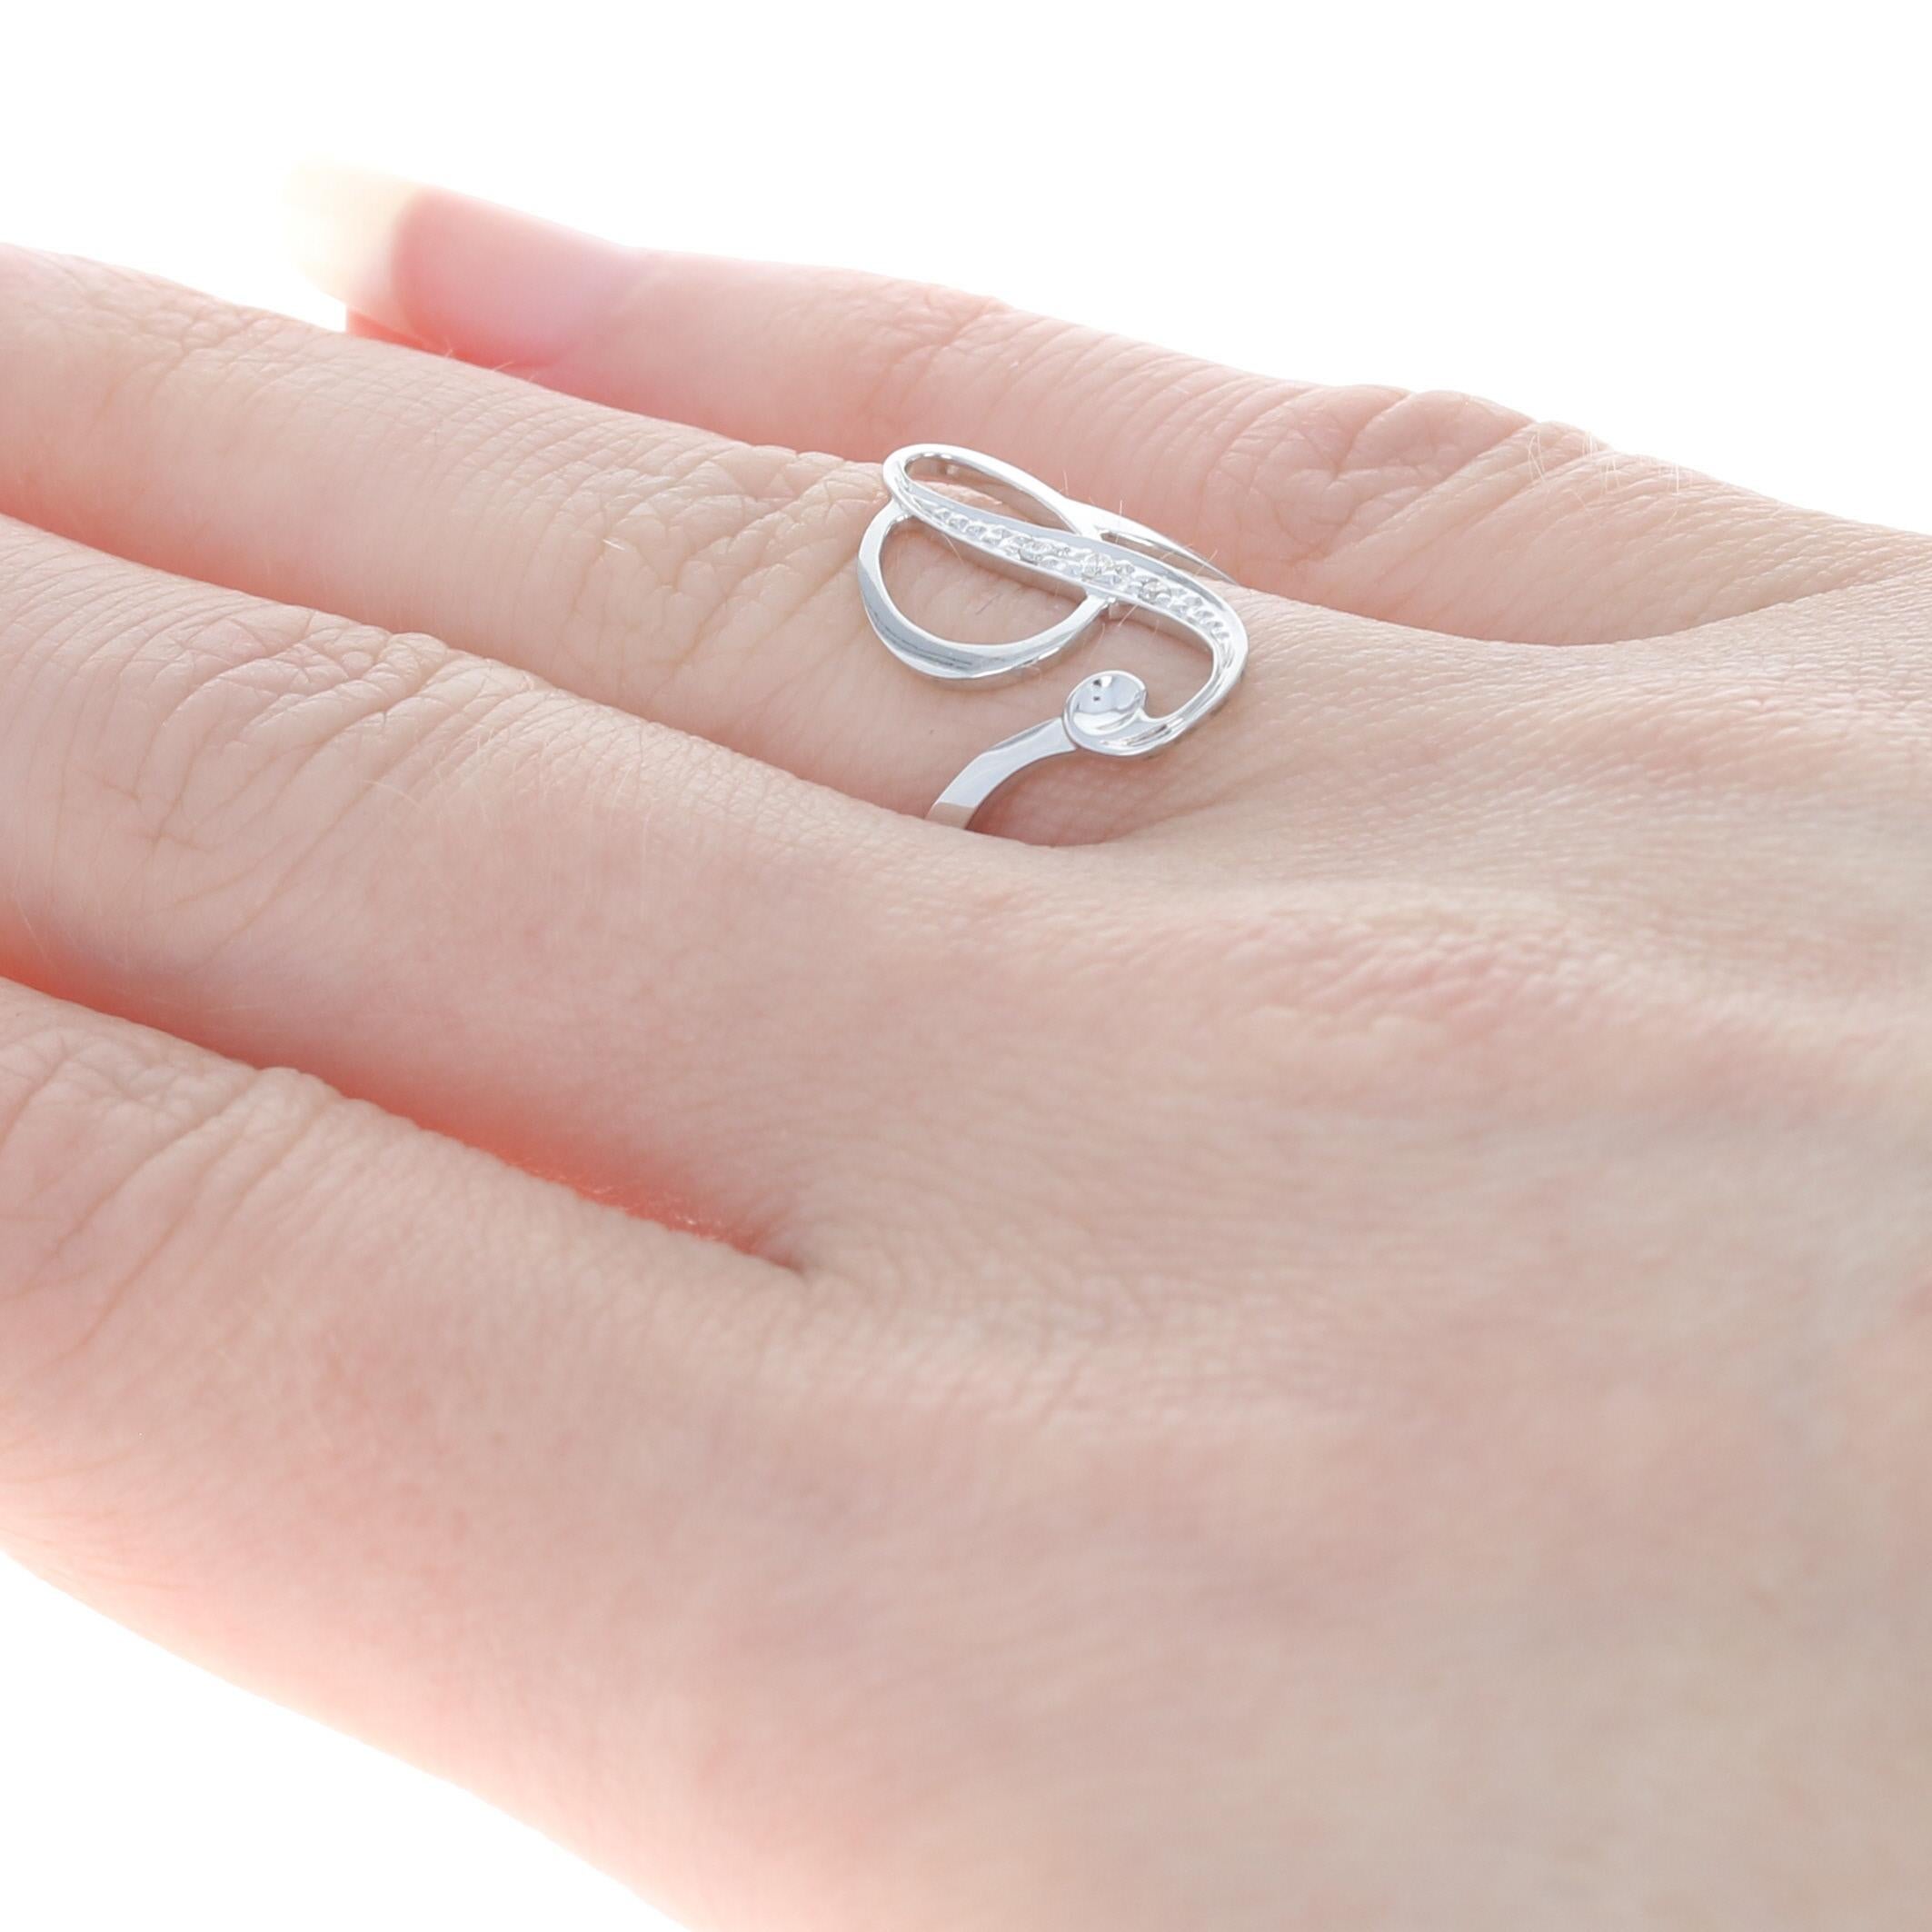 For Sale:  New Initial L Signet Ring, 14k White Gold Women's 4